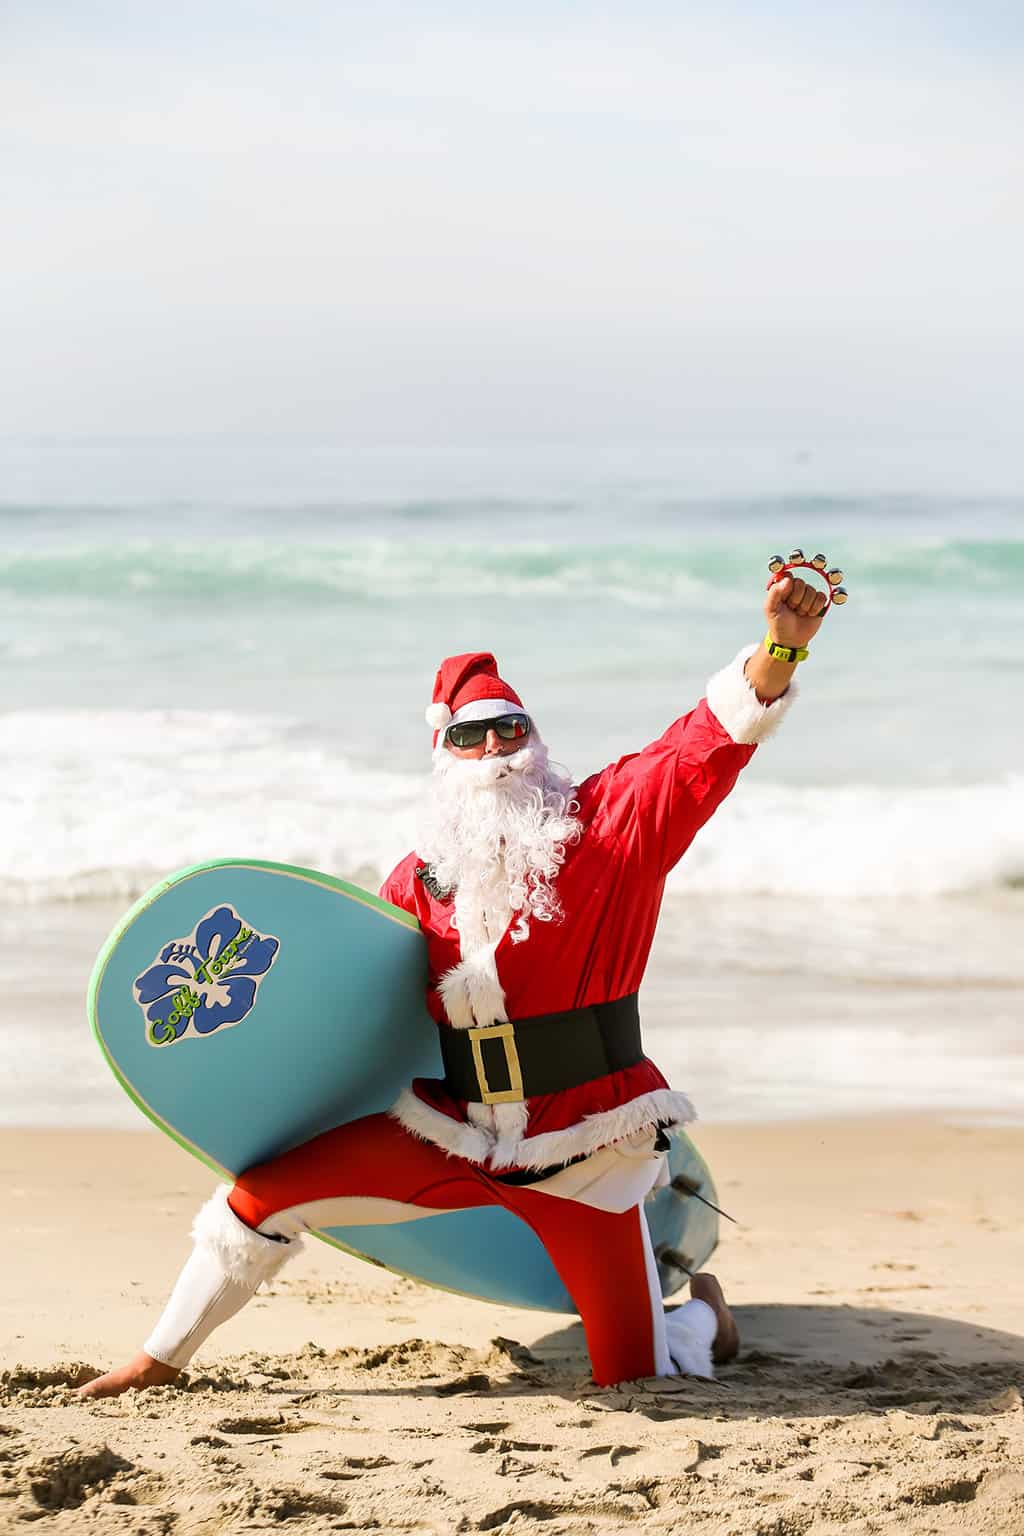  Surfing Santa Competition is one of the best Things to do in Dana Point at Christmas in California